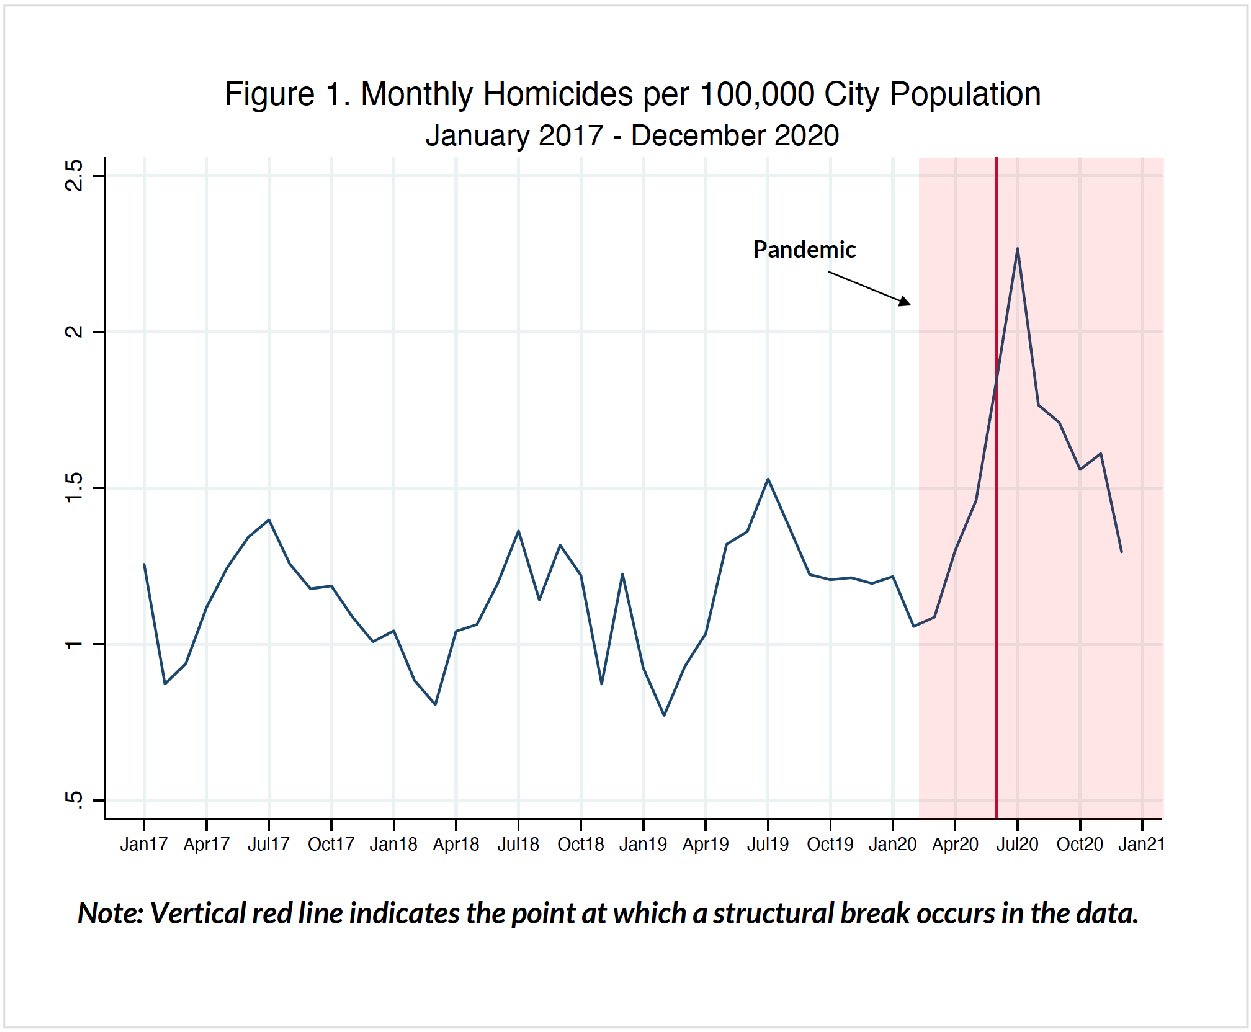 GG GlobalDigest US Homicide On The Rise Charts 02 ?width=1410&name=GG GlobalDigest US Homicide On The Rise Charts 02 